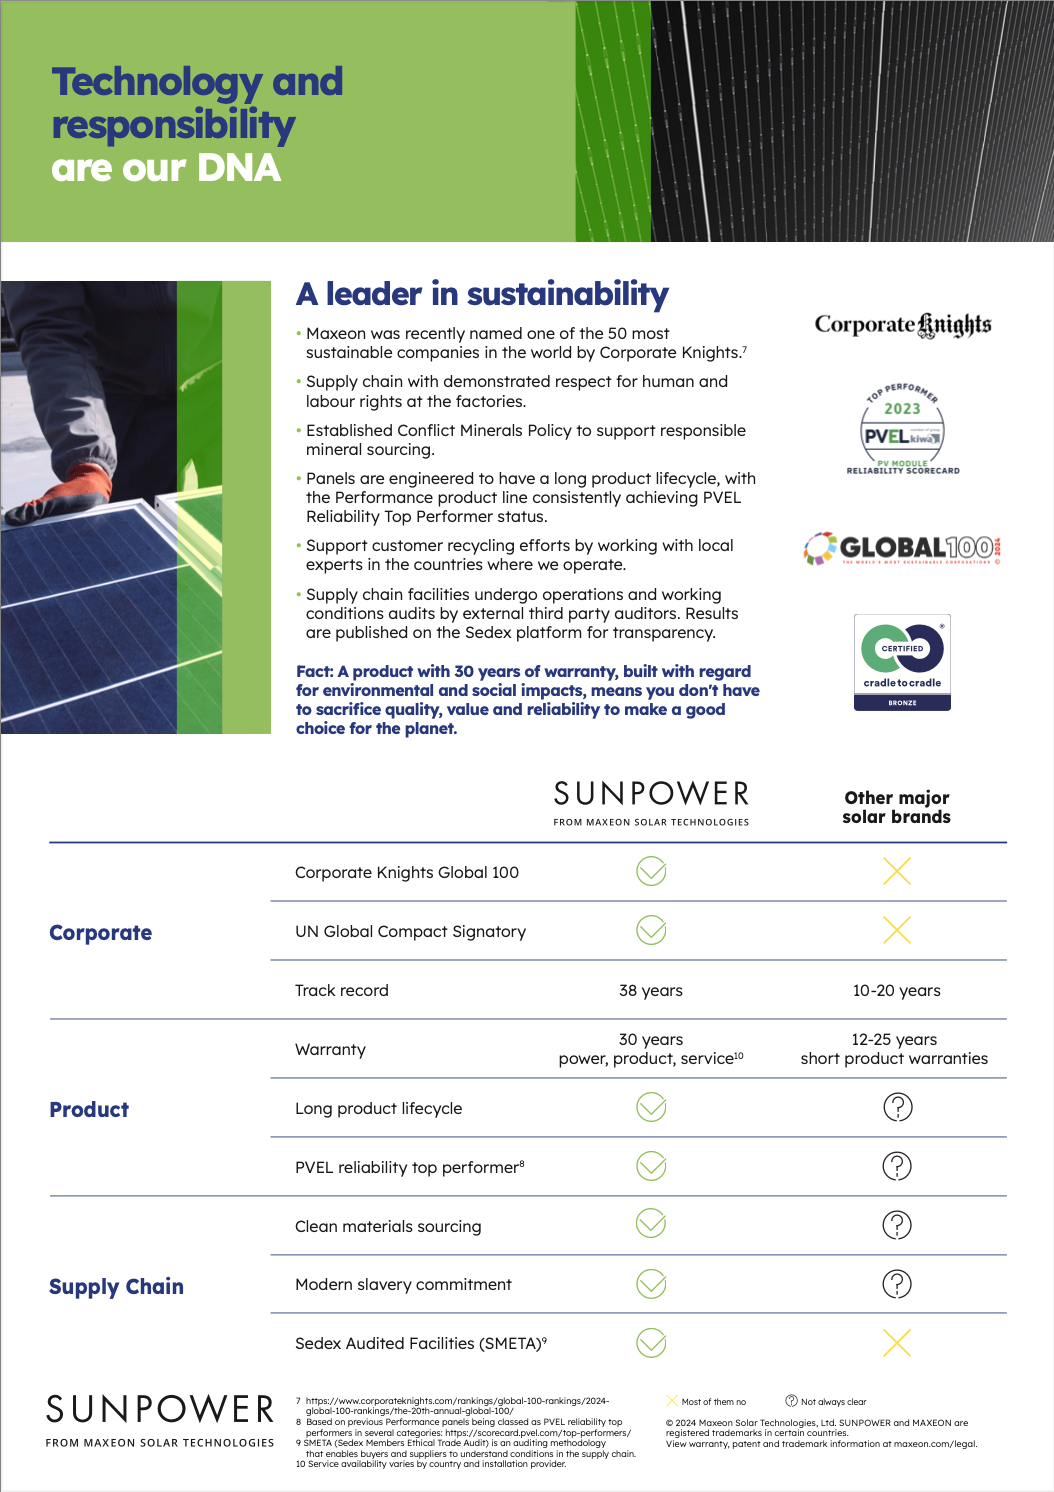 SunPower Performance 7 flyer showcasing the company's sustainability leadership, 30-year warranty, and recognition by Corporate Knights. Highlights include robust supply chain practices, long product lifecycle, and top performer status in PVEL reliability. The flyer compares SunPower's comprehensive warranty and commitment to ethical sourcing with other solar brands.